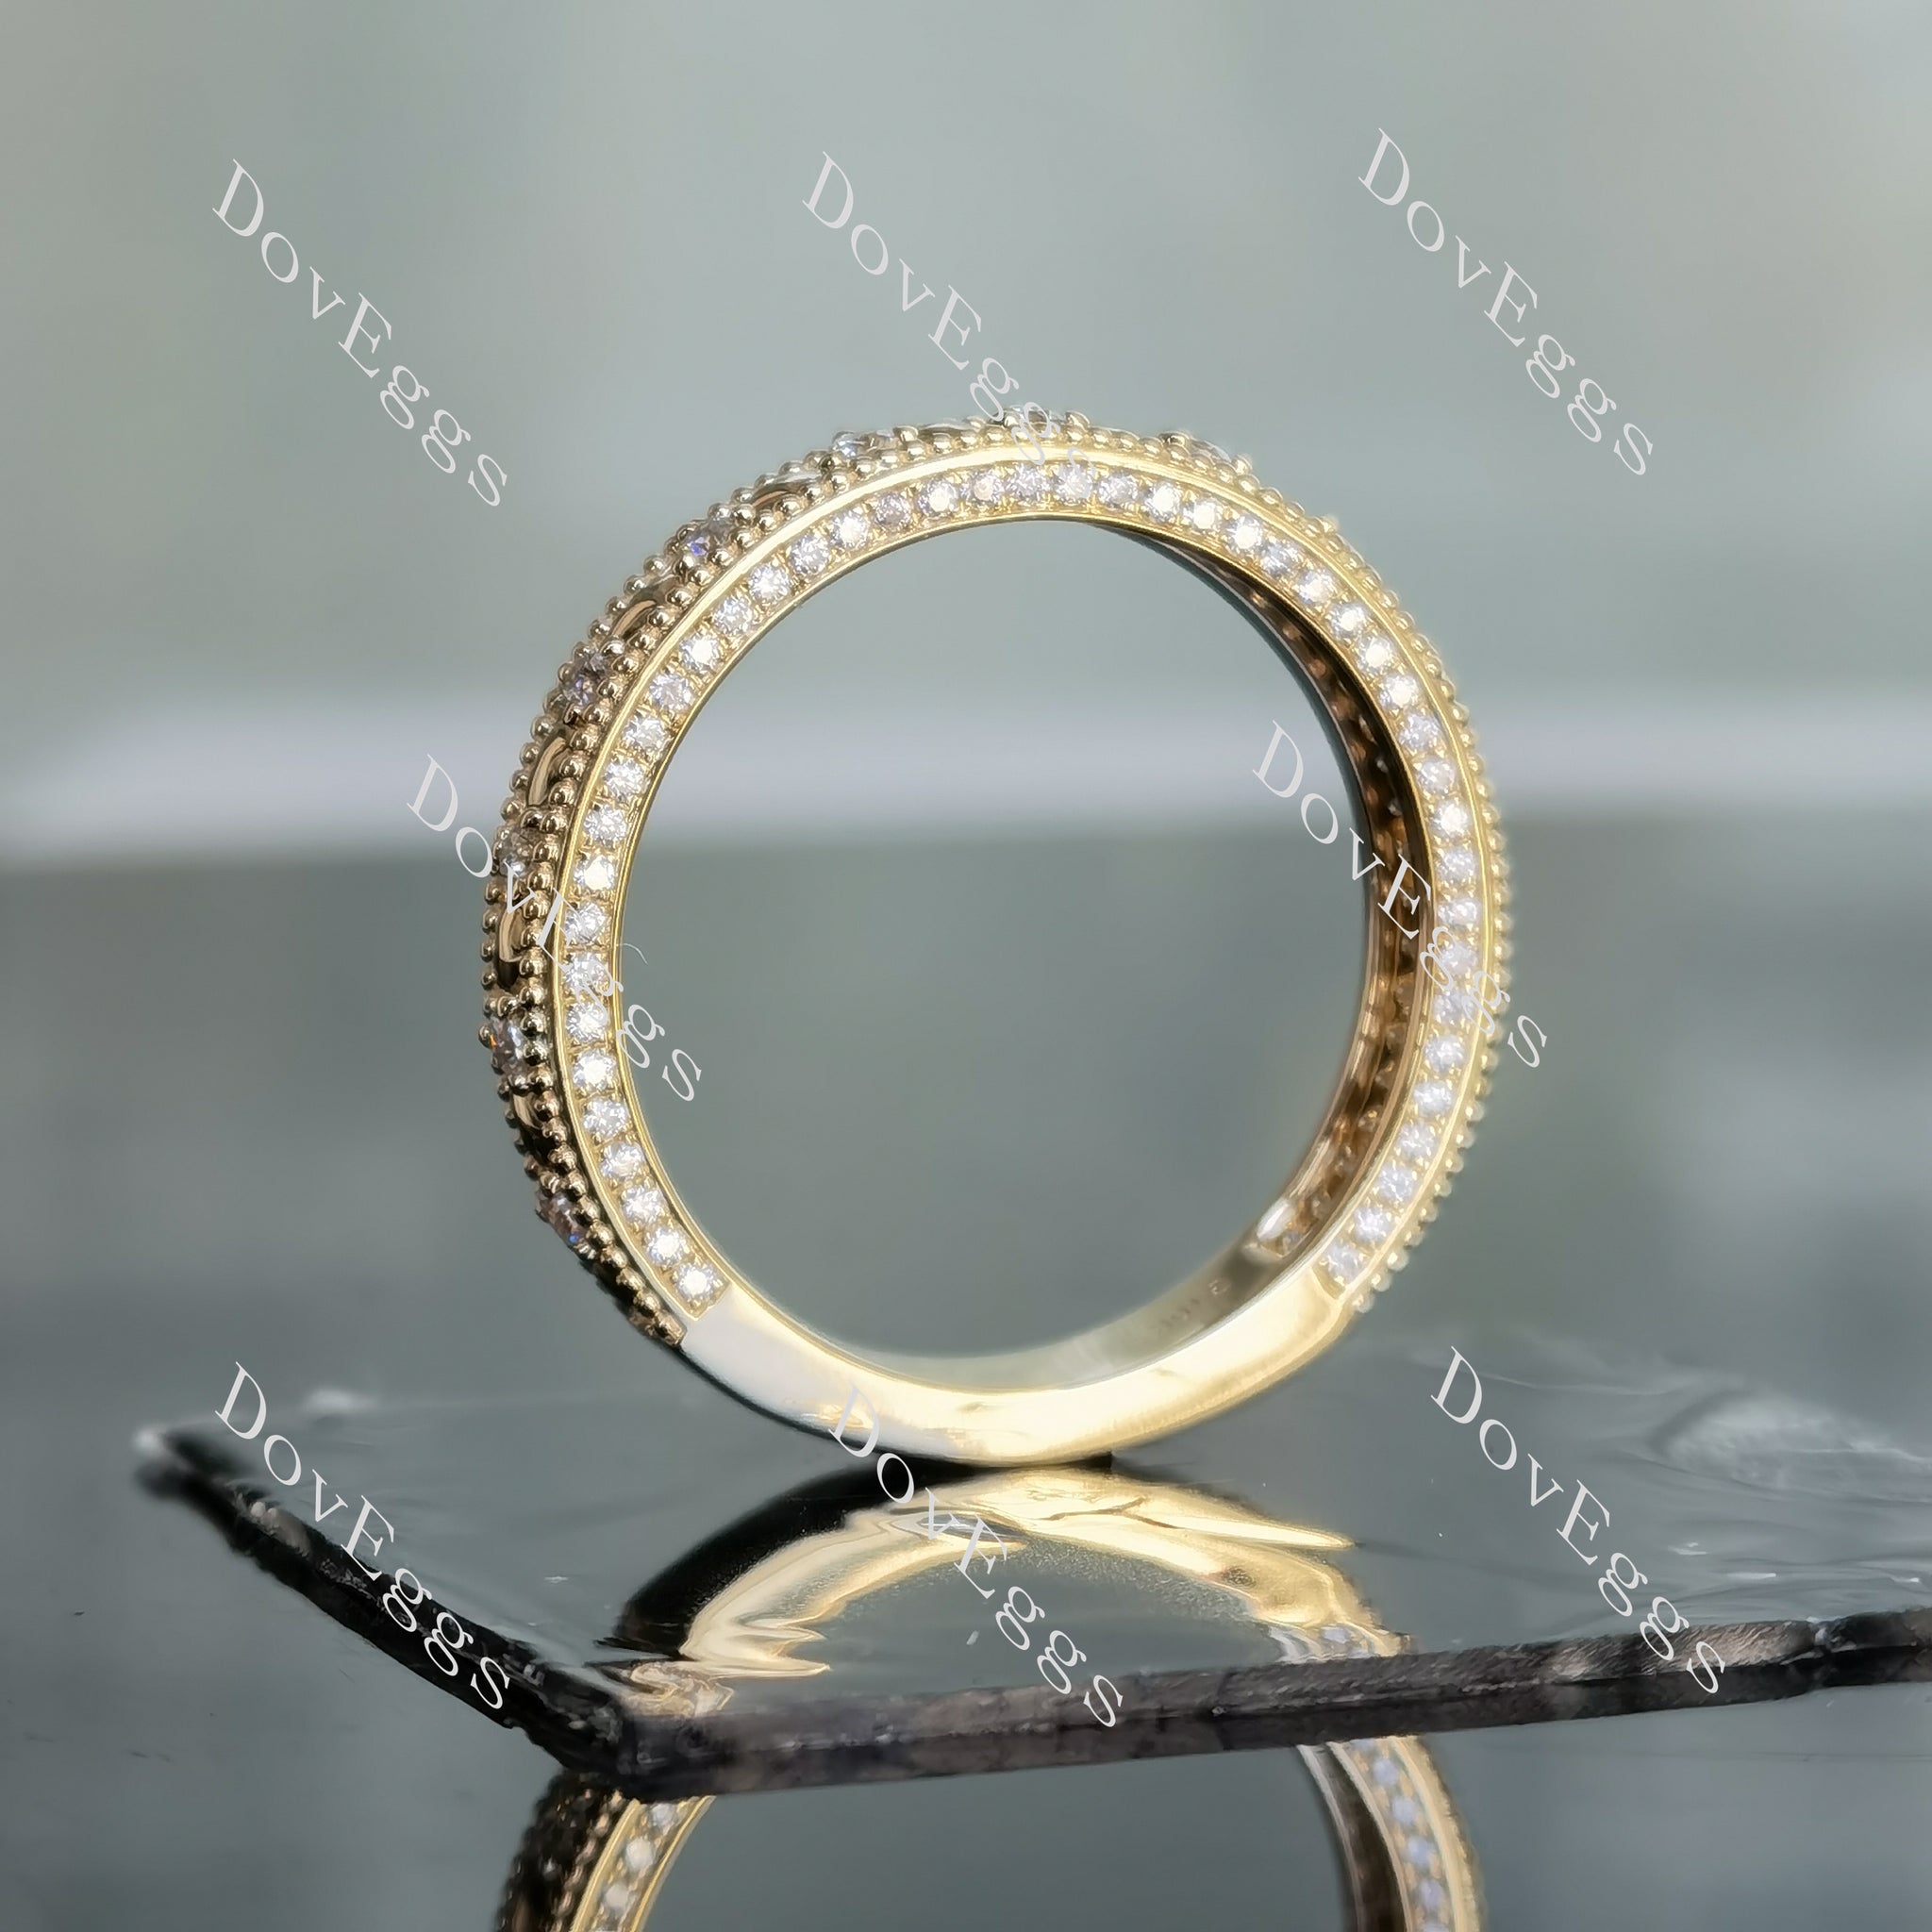 Doveggs round 3/4 eternity pave near colorless/colorless moissanite wedding band-3.4mm band width